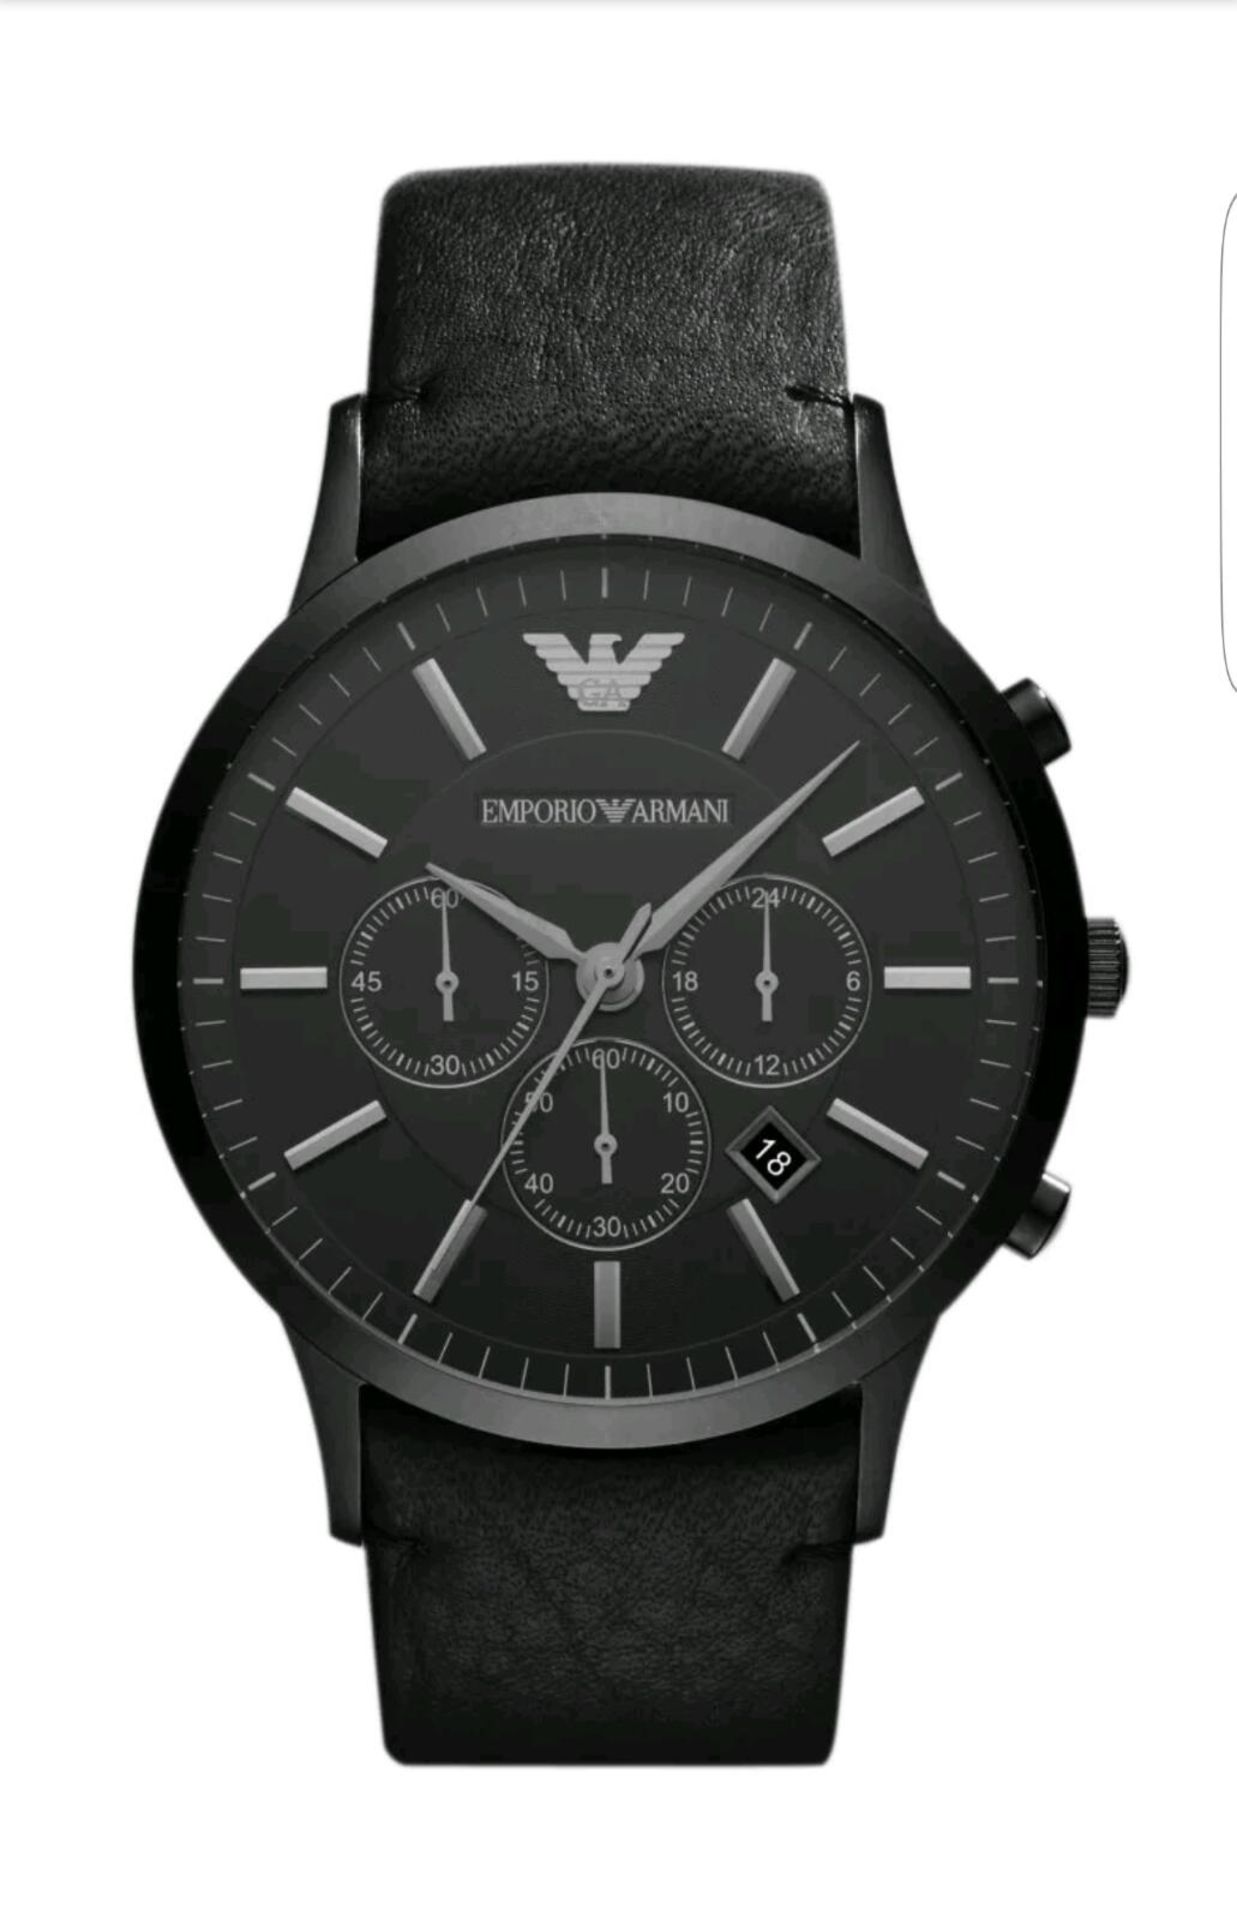 BRAND NEW EMPORIO ARMANI AR2461 MENS BLACK DIAL LEATHER STRAP WATCH, COMPLETE WITH ORIGINAL BOX